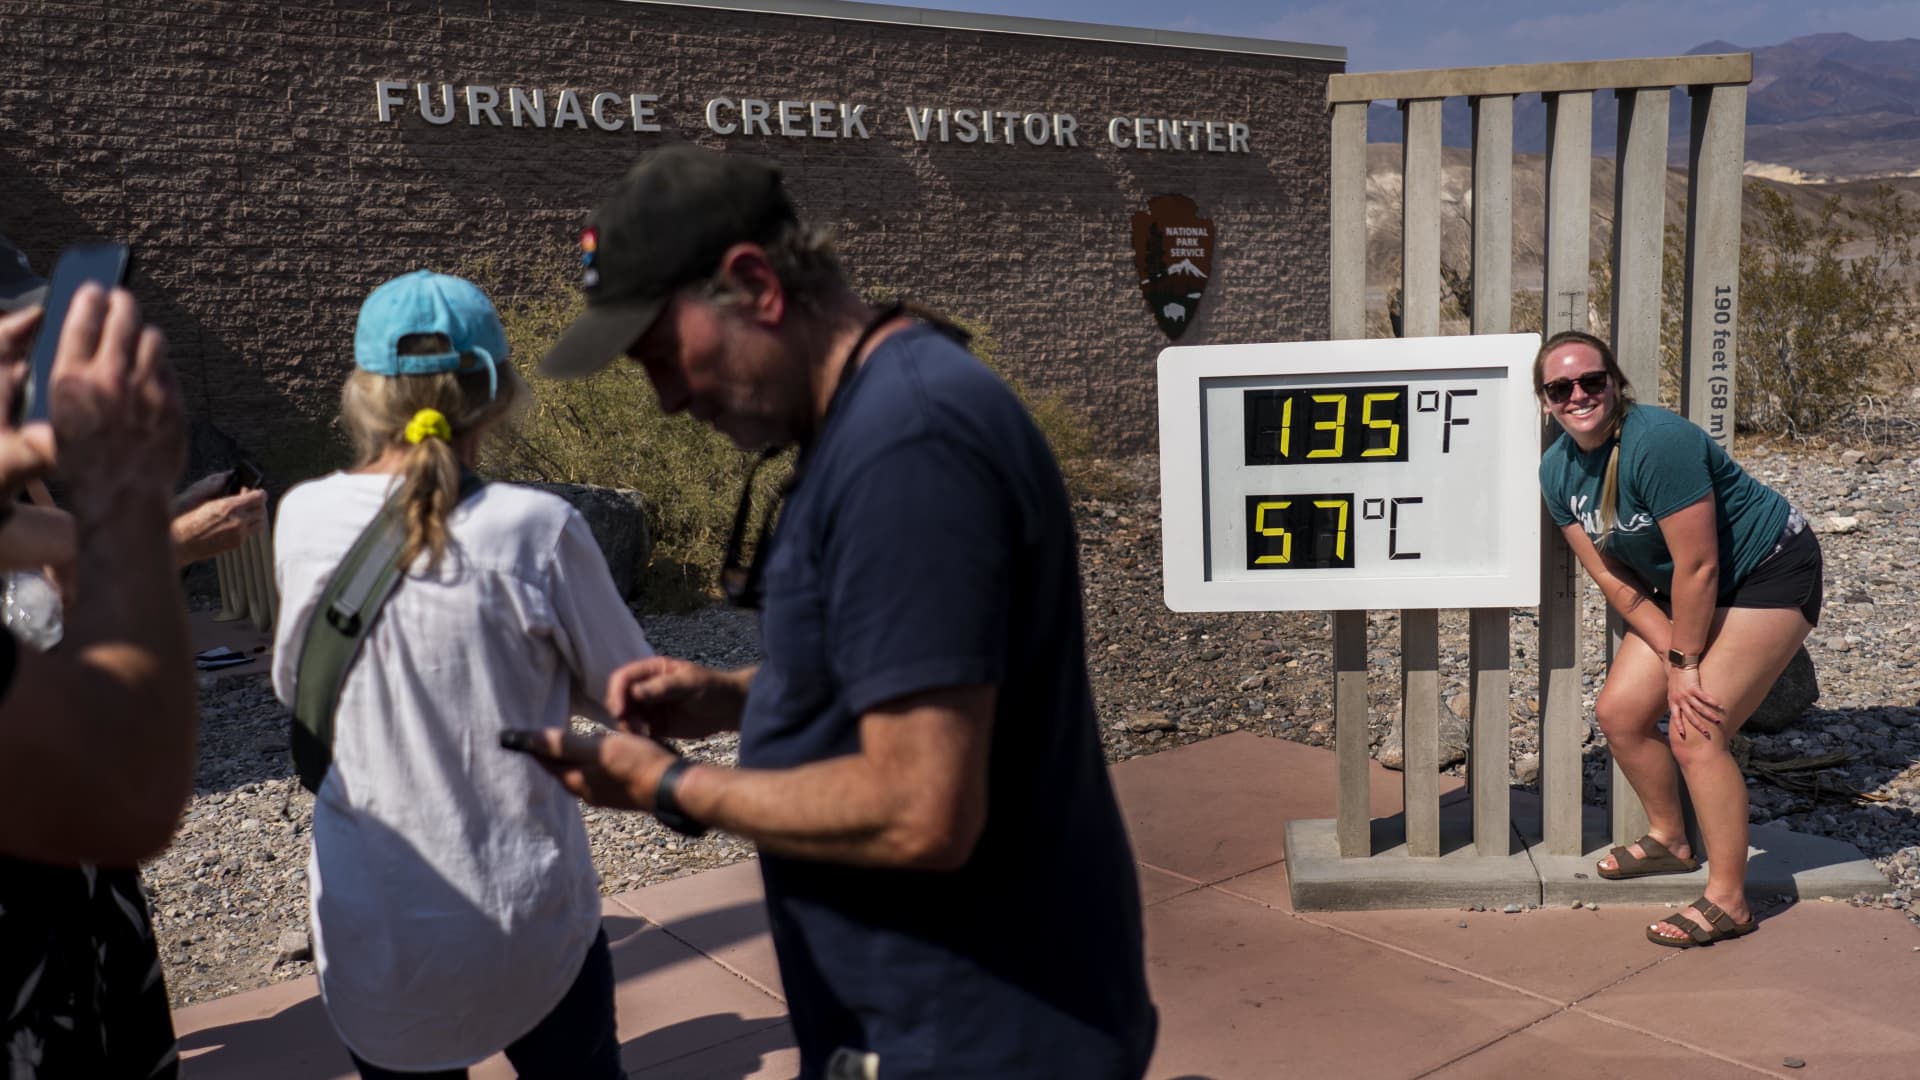 With record setting heat expected tourists stop at the Furnace Creek Visitors Center to take pictures in front of the thermometer showing the current extreme record breaking temperature of 135 degrees Fahrenheit in Death Valley National Park, California Saturday July 10, 2021.